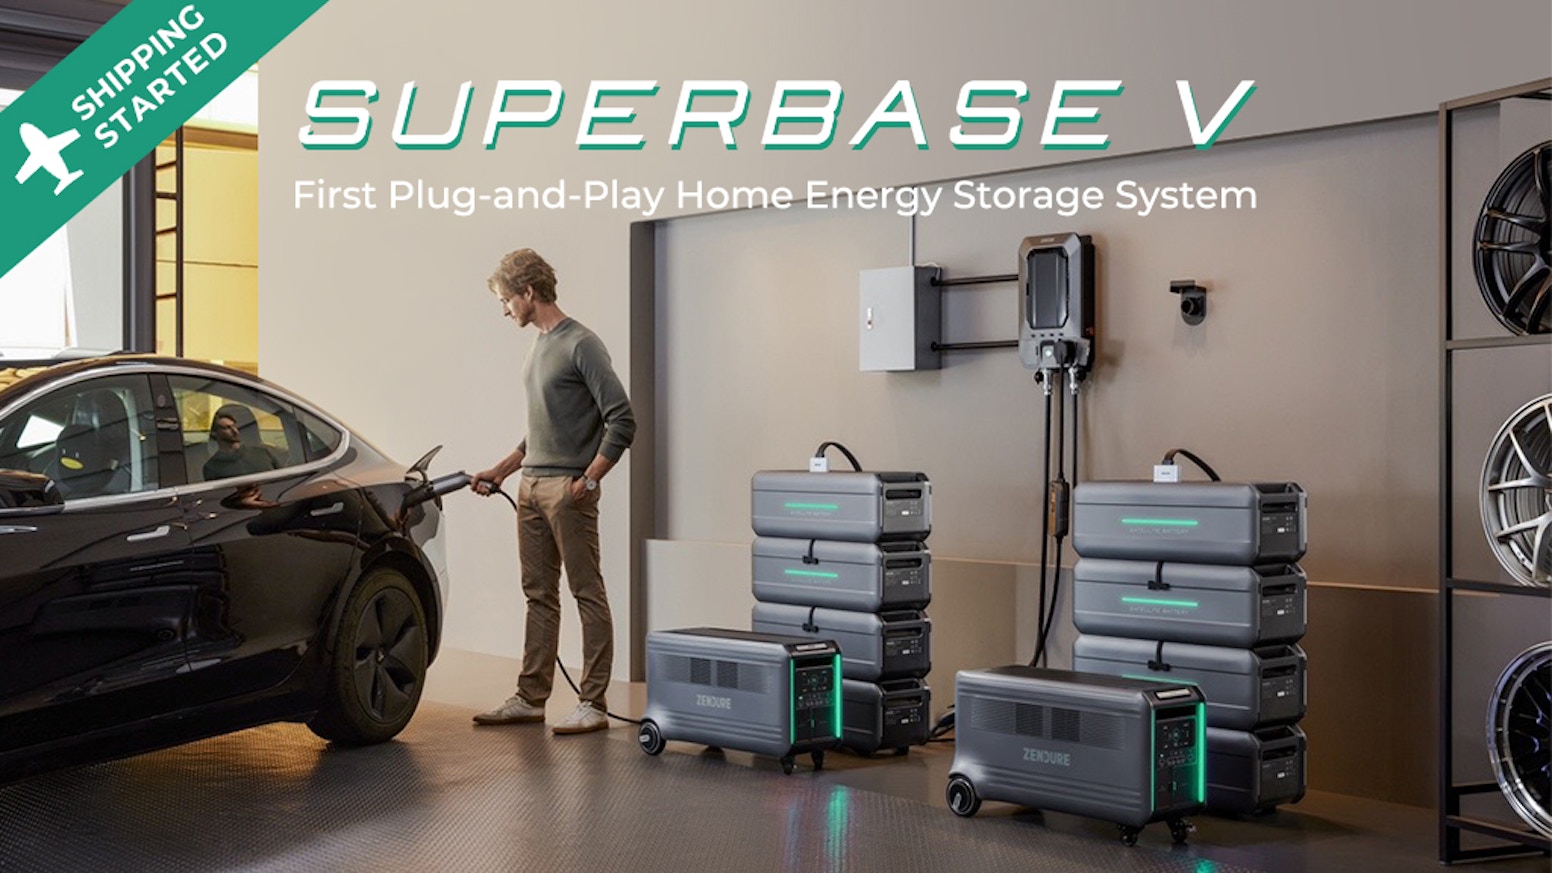 SuperBase V: First Plug-and-Play Home Energy Storage System